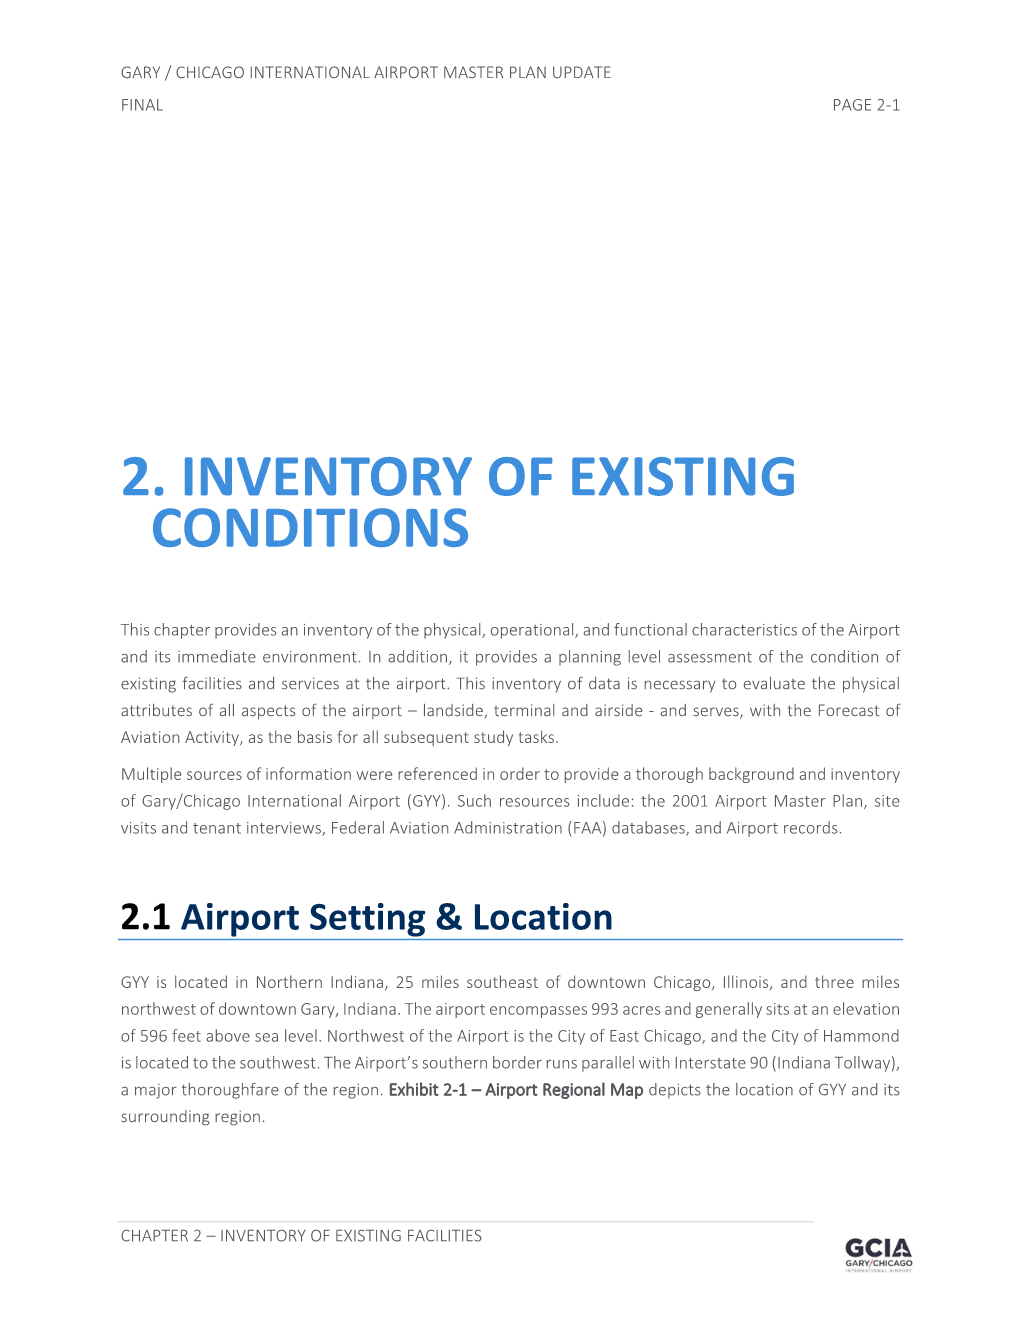 2 – INVENTORY of EXISTING FACILITIES GARY / CHICAGO INTERNATIONAL AIRPORT MASTER PLAN UPDATE FINAL PAGE 2-2 Exhibit 2-1– Airport Regional Map